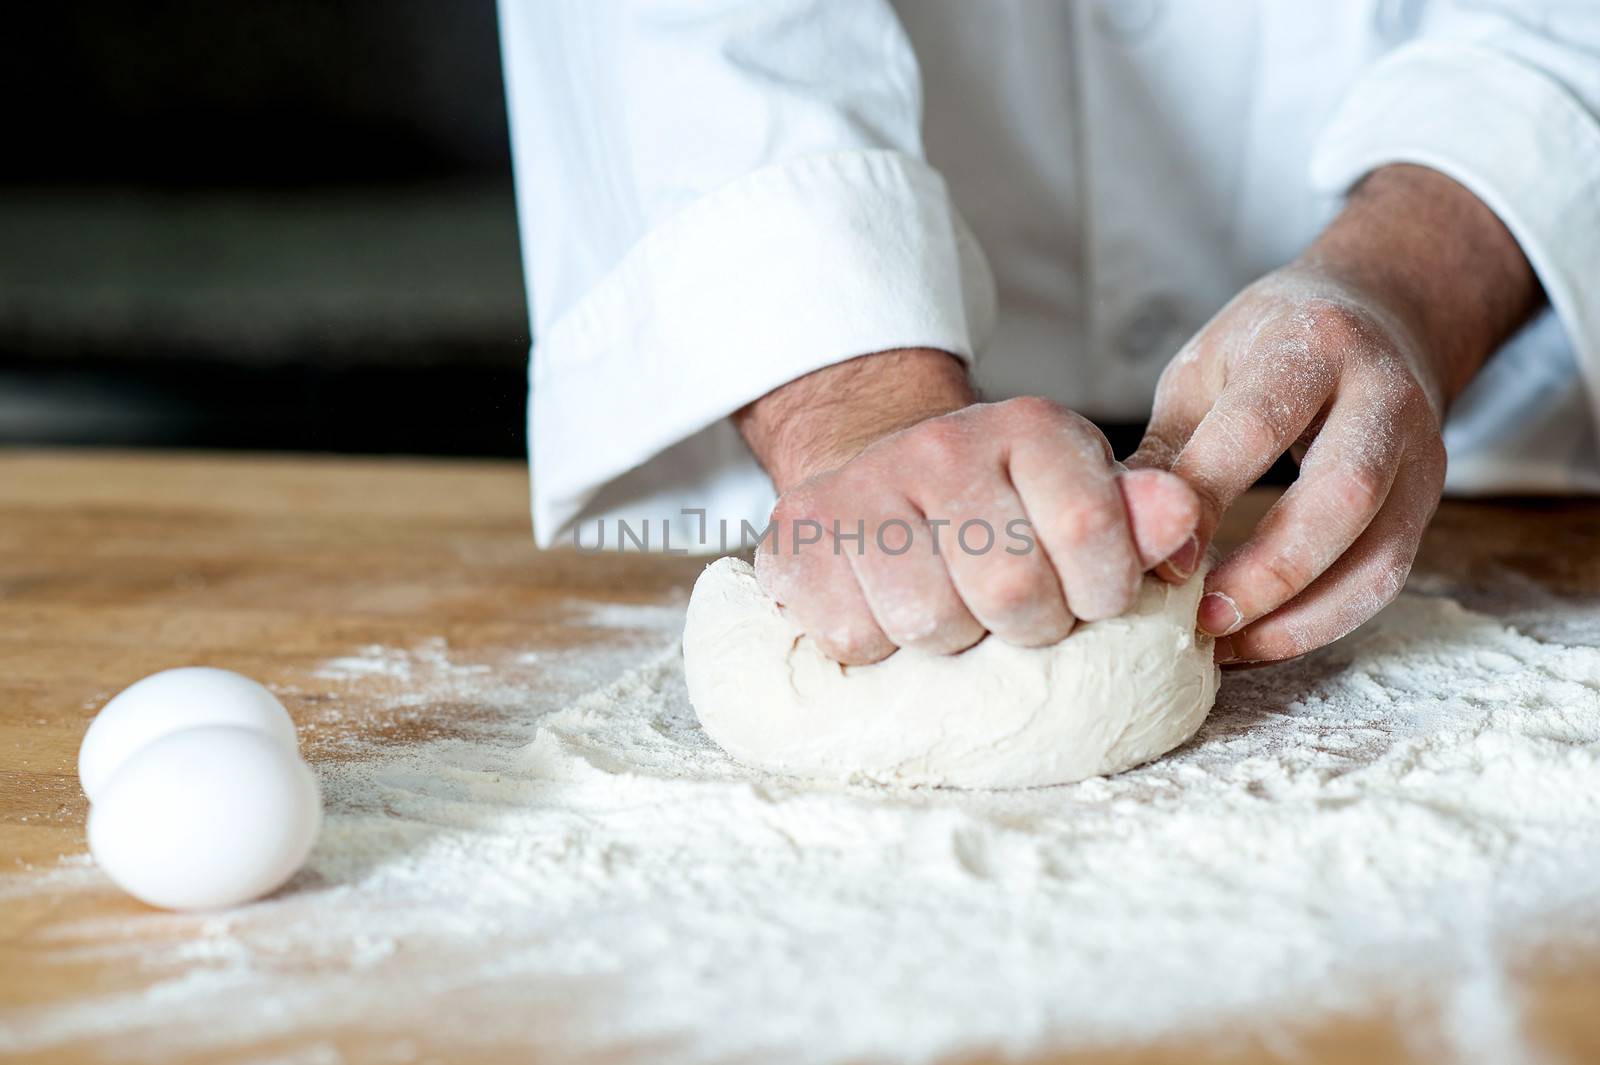 Chef kneading dough with eggs beside